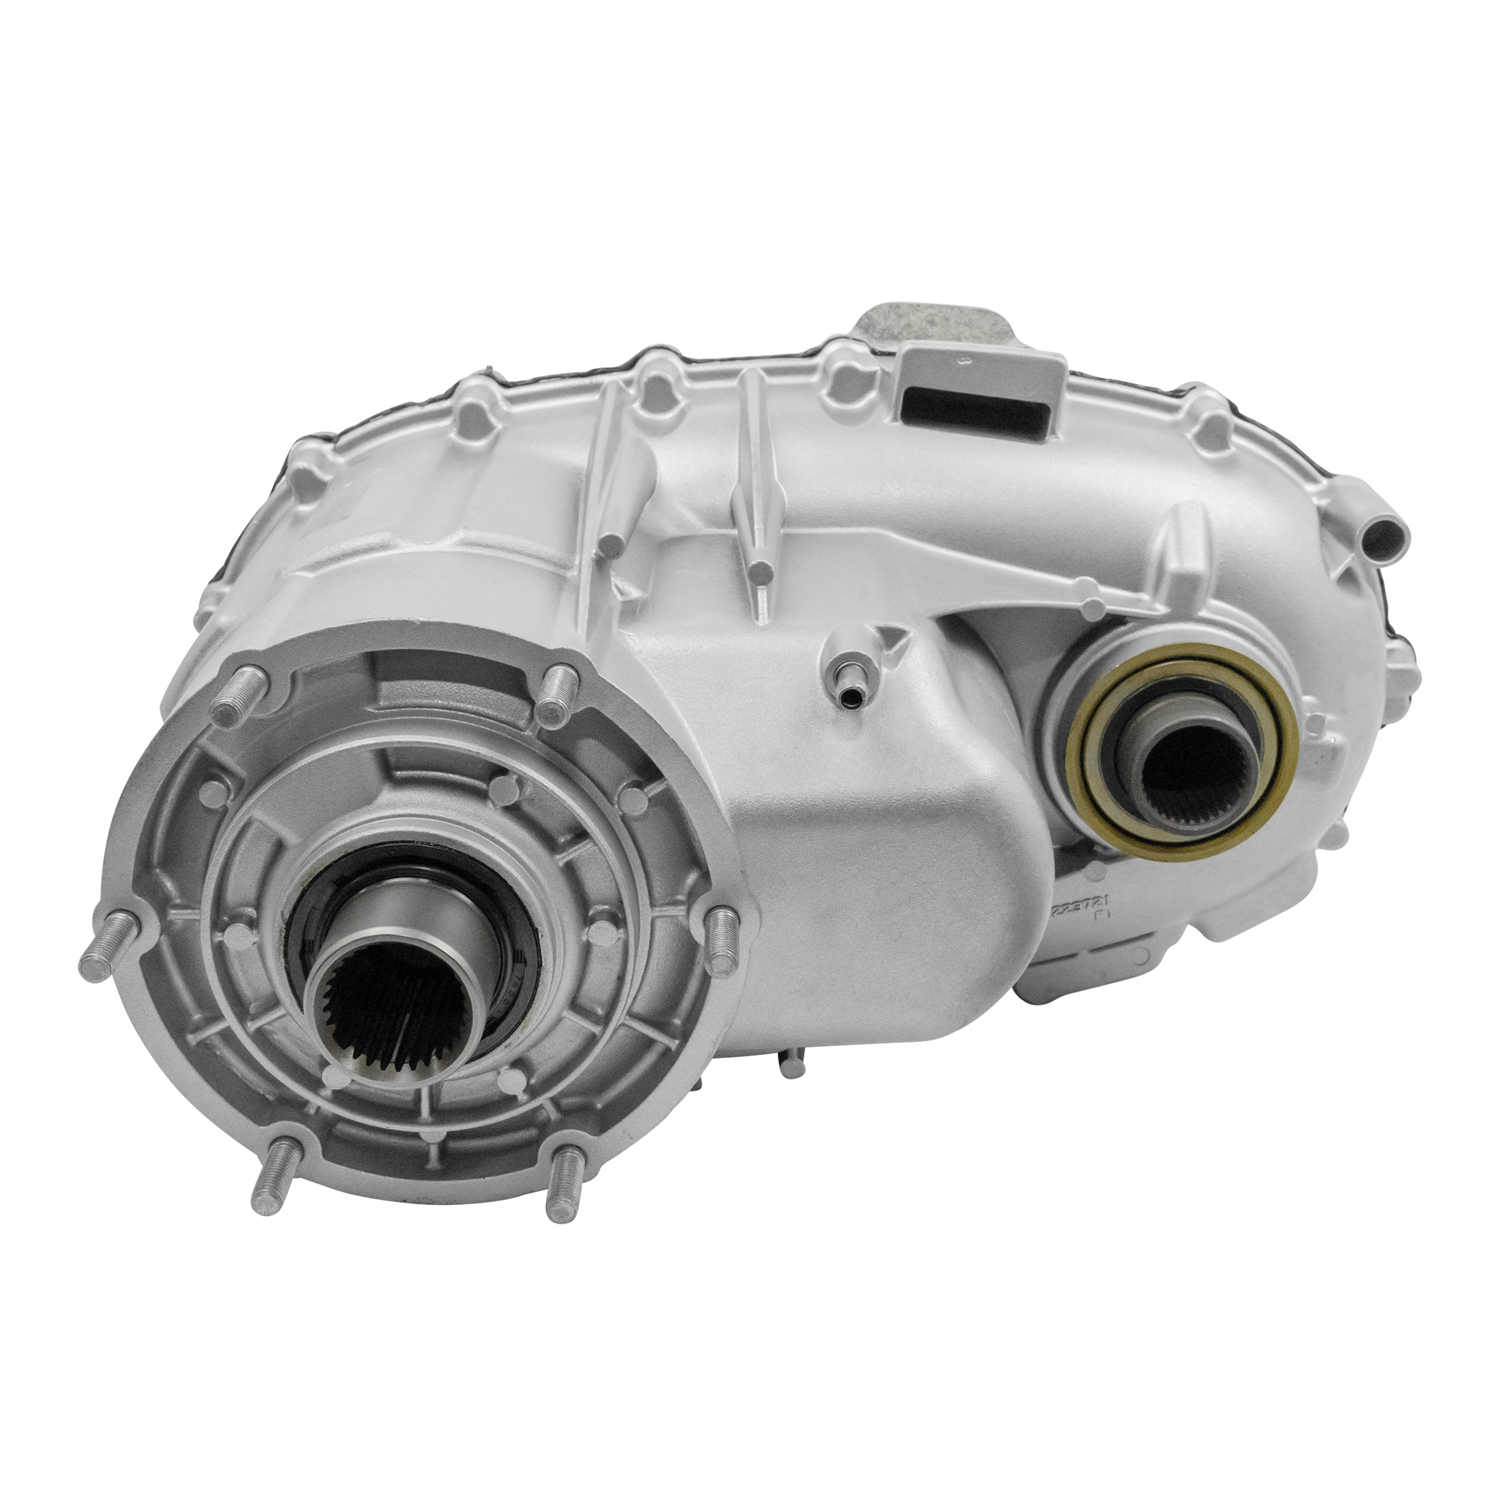 Remanufactured MP1626 Electric Shift Transfer Case, 2007-2010 Sierra 2500/3500 And Silverado 2500/3500, And 2009-2010 Suburban 2500 And Yukon XL 2500, With Option Code NQF. Includes a New Shift Motor.